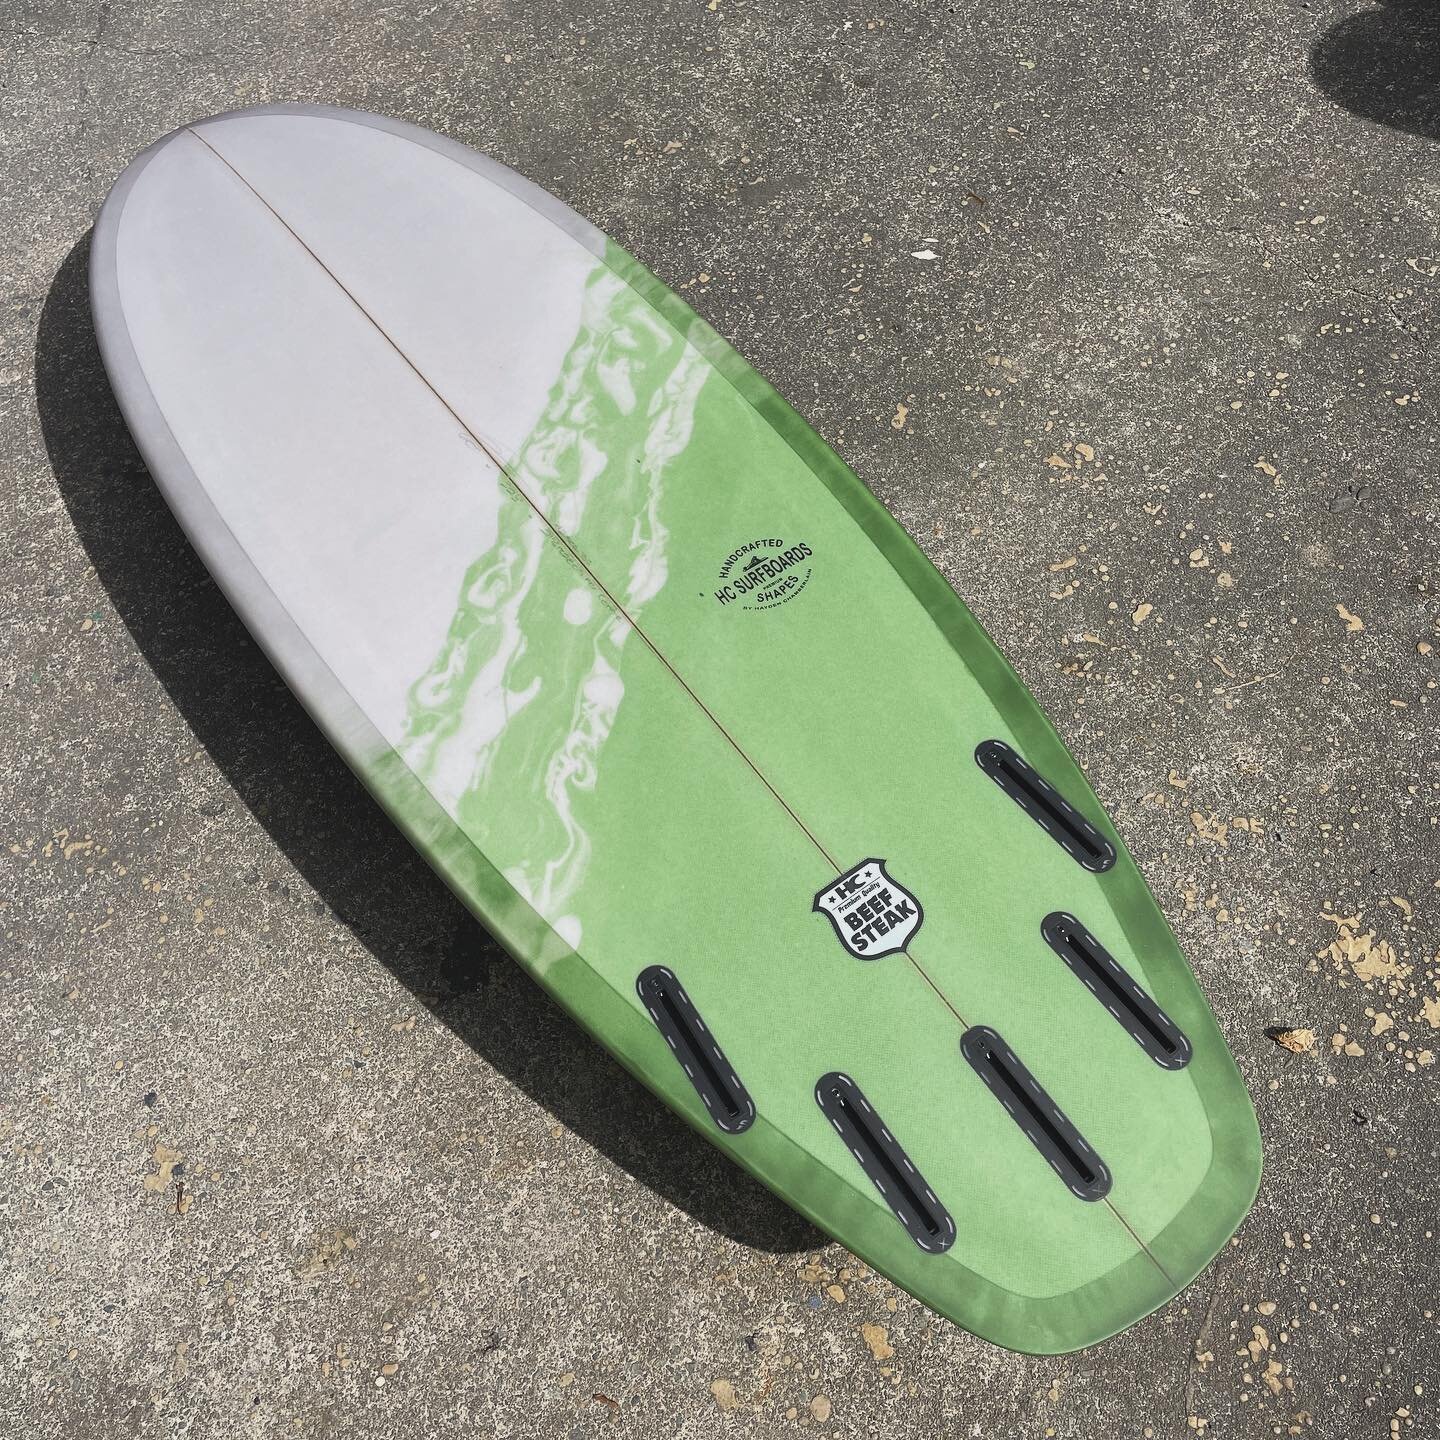 Custom 6&rsquo;0&rdquo; Beefsteak for @c_raddy the Beefsteak is a great small wave groveler, fast and loose with a flat deck and turned down rails, gives heaps of volume with a nice sensitive rail. A perfect board for summer waves!